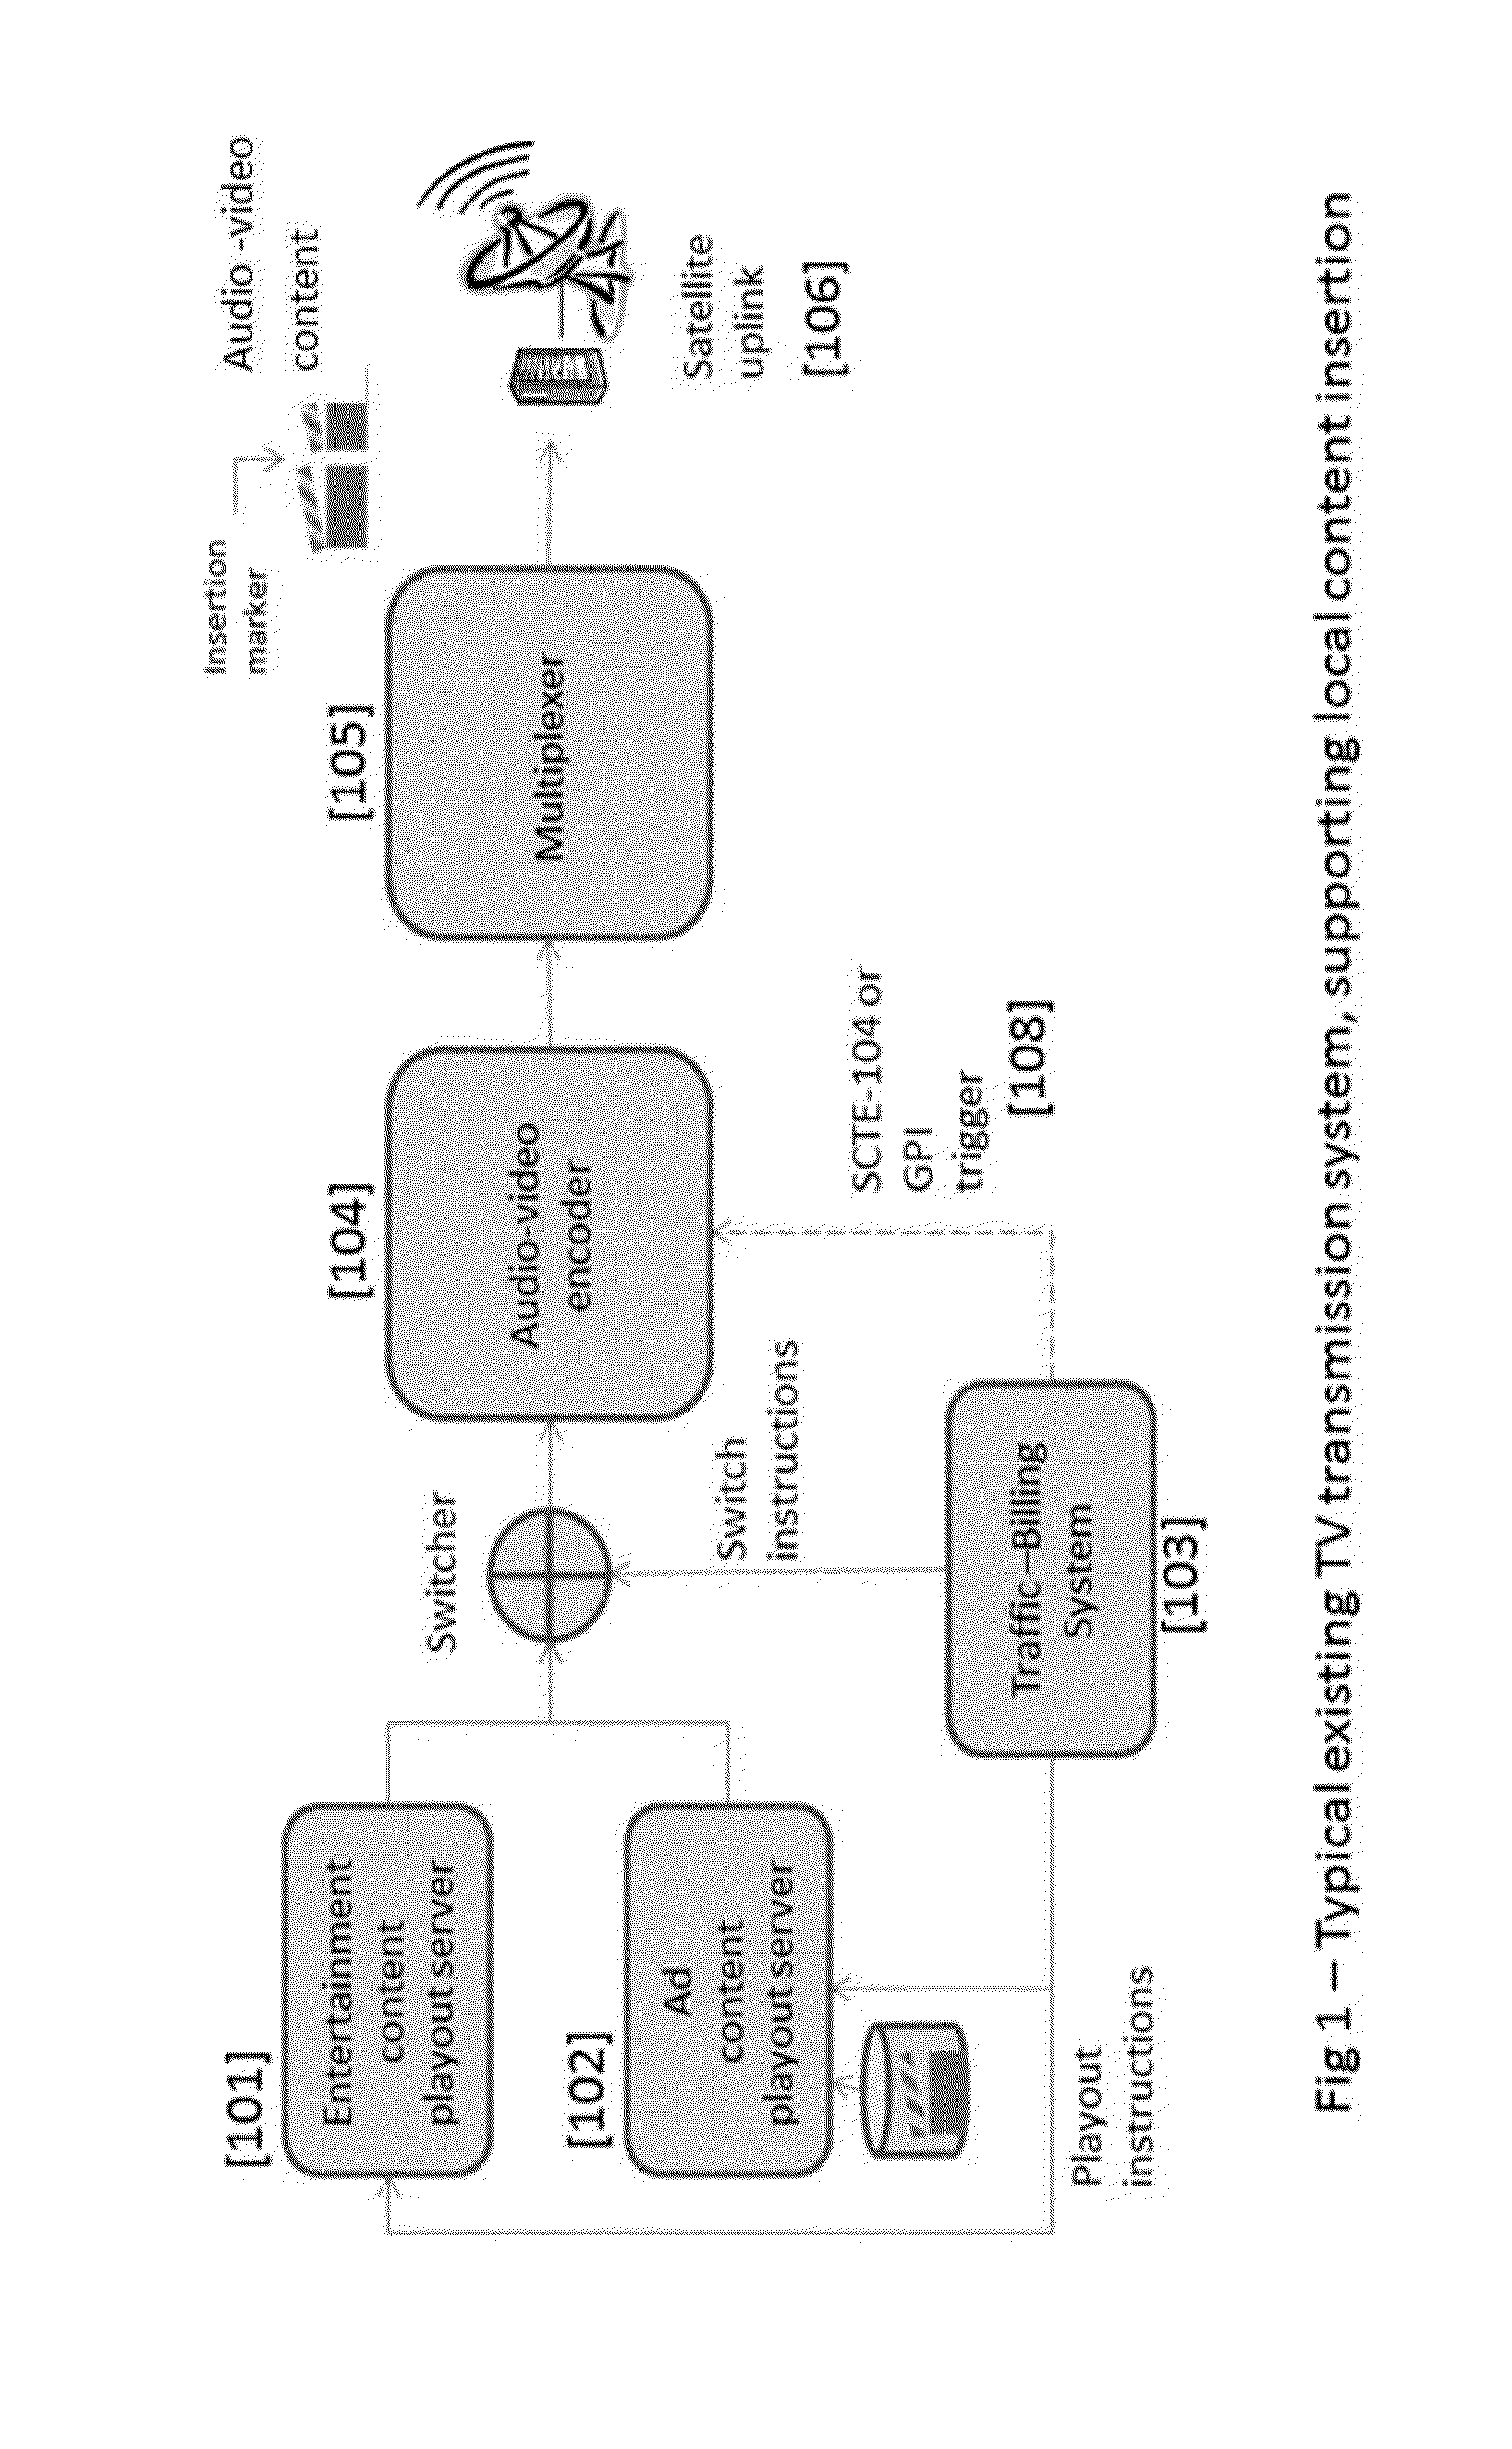 System and method for seamless content insertion on network content using audio-video fingerprinting and watermarking